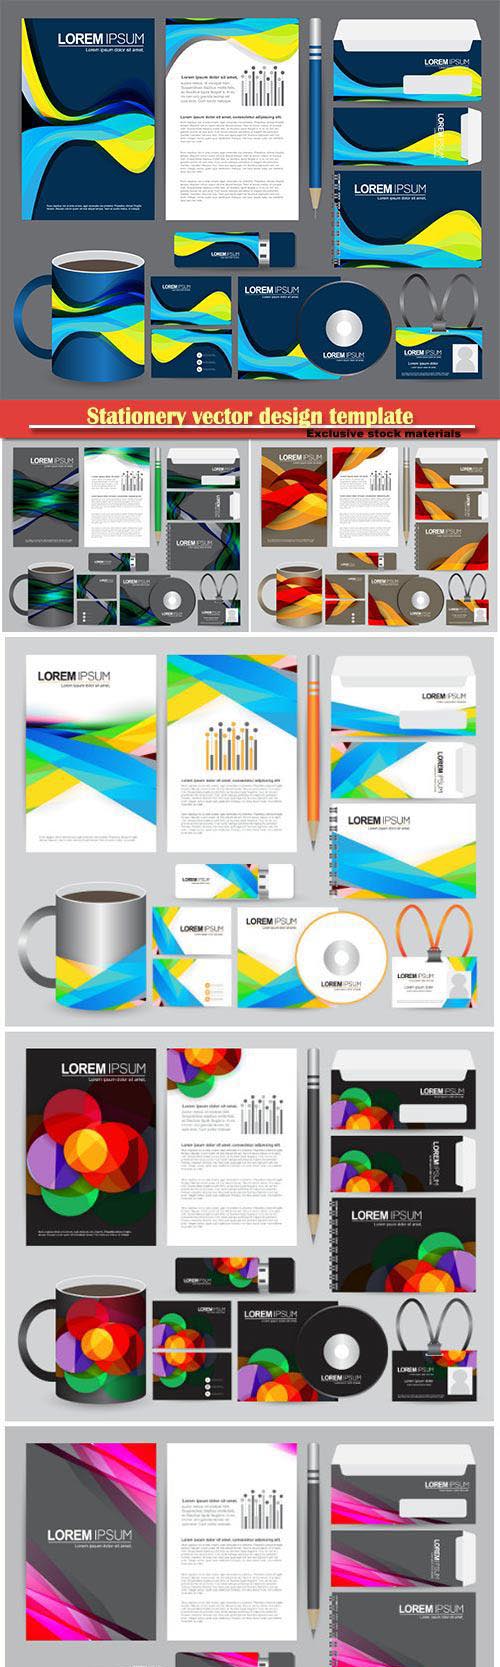 Stationery vector design template